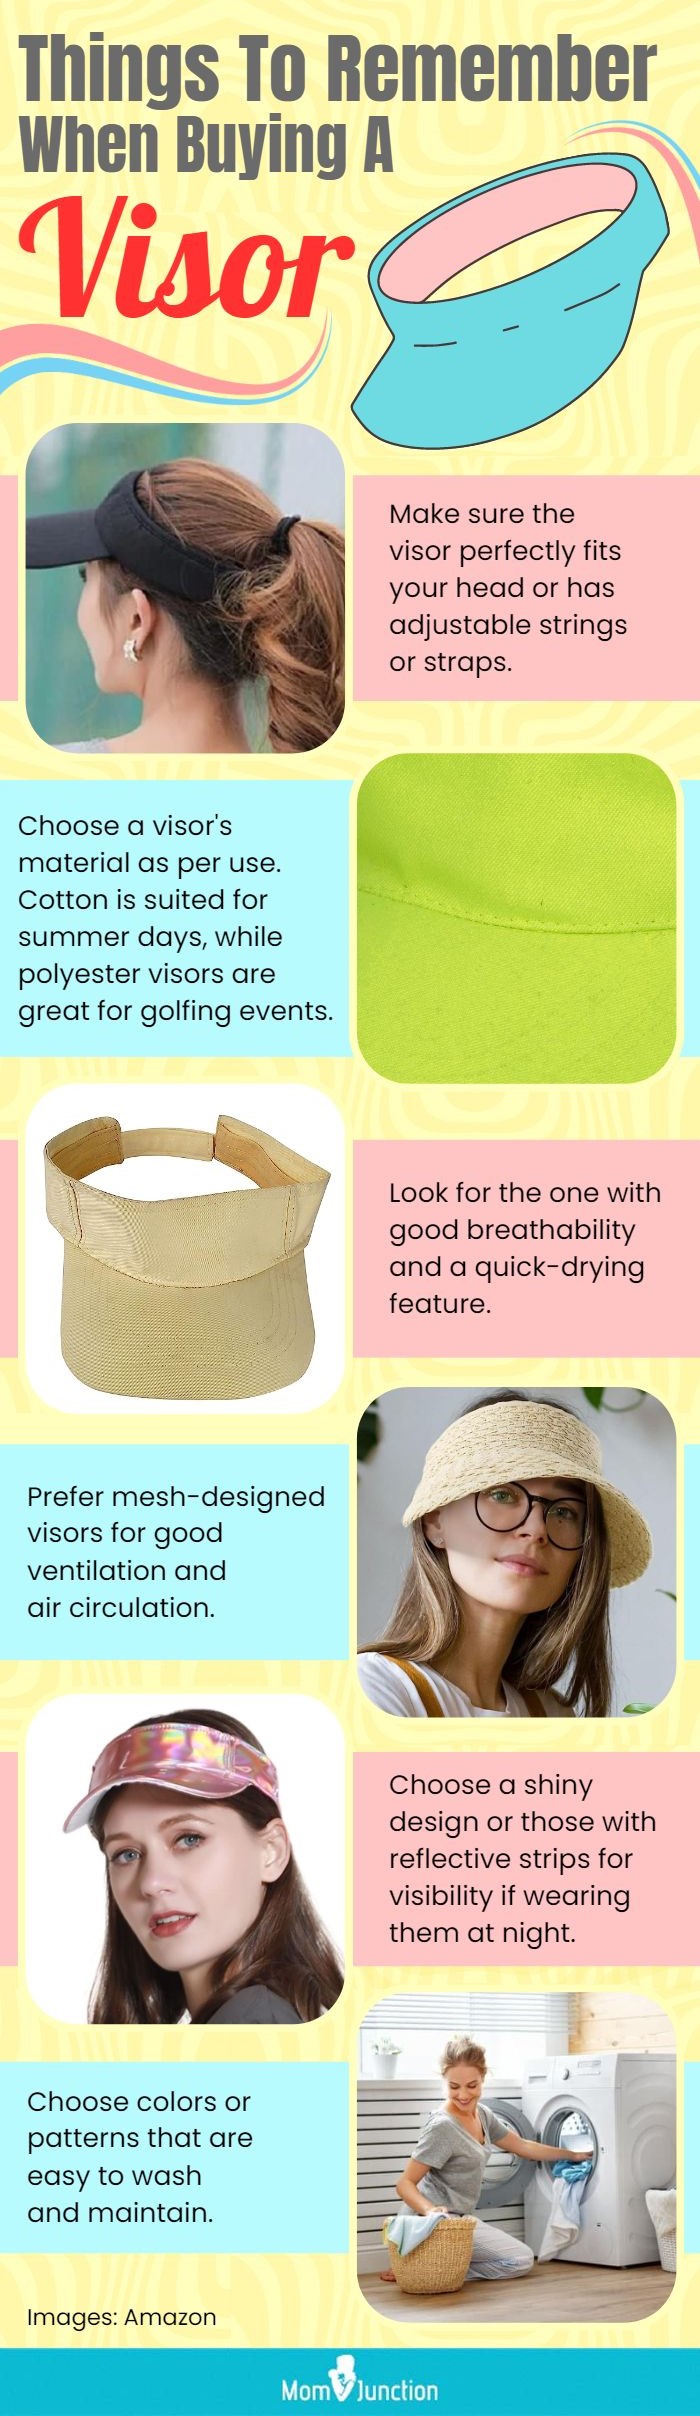 Things To Remember When Buying A Visor (infographic)